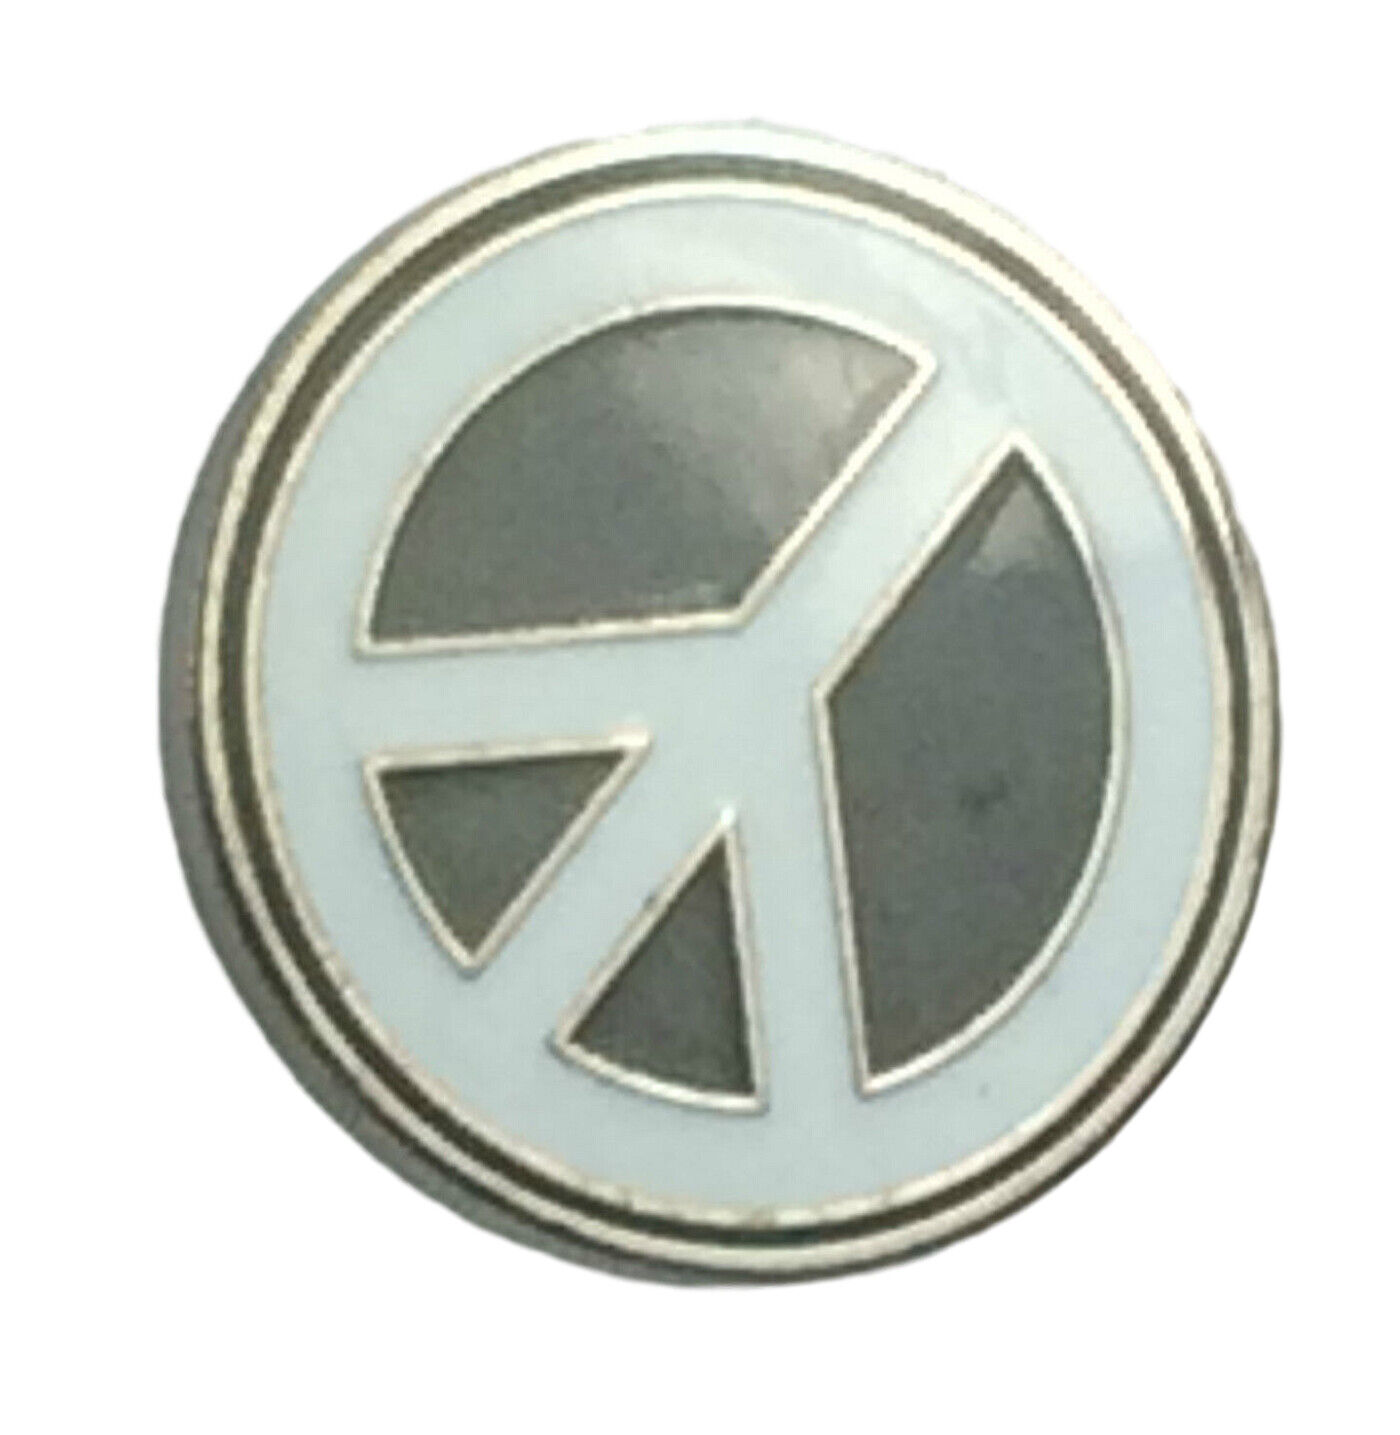 CND Campaign for Nuclear Disarmament Quality enamel lapel pin badge